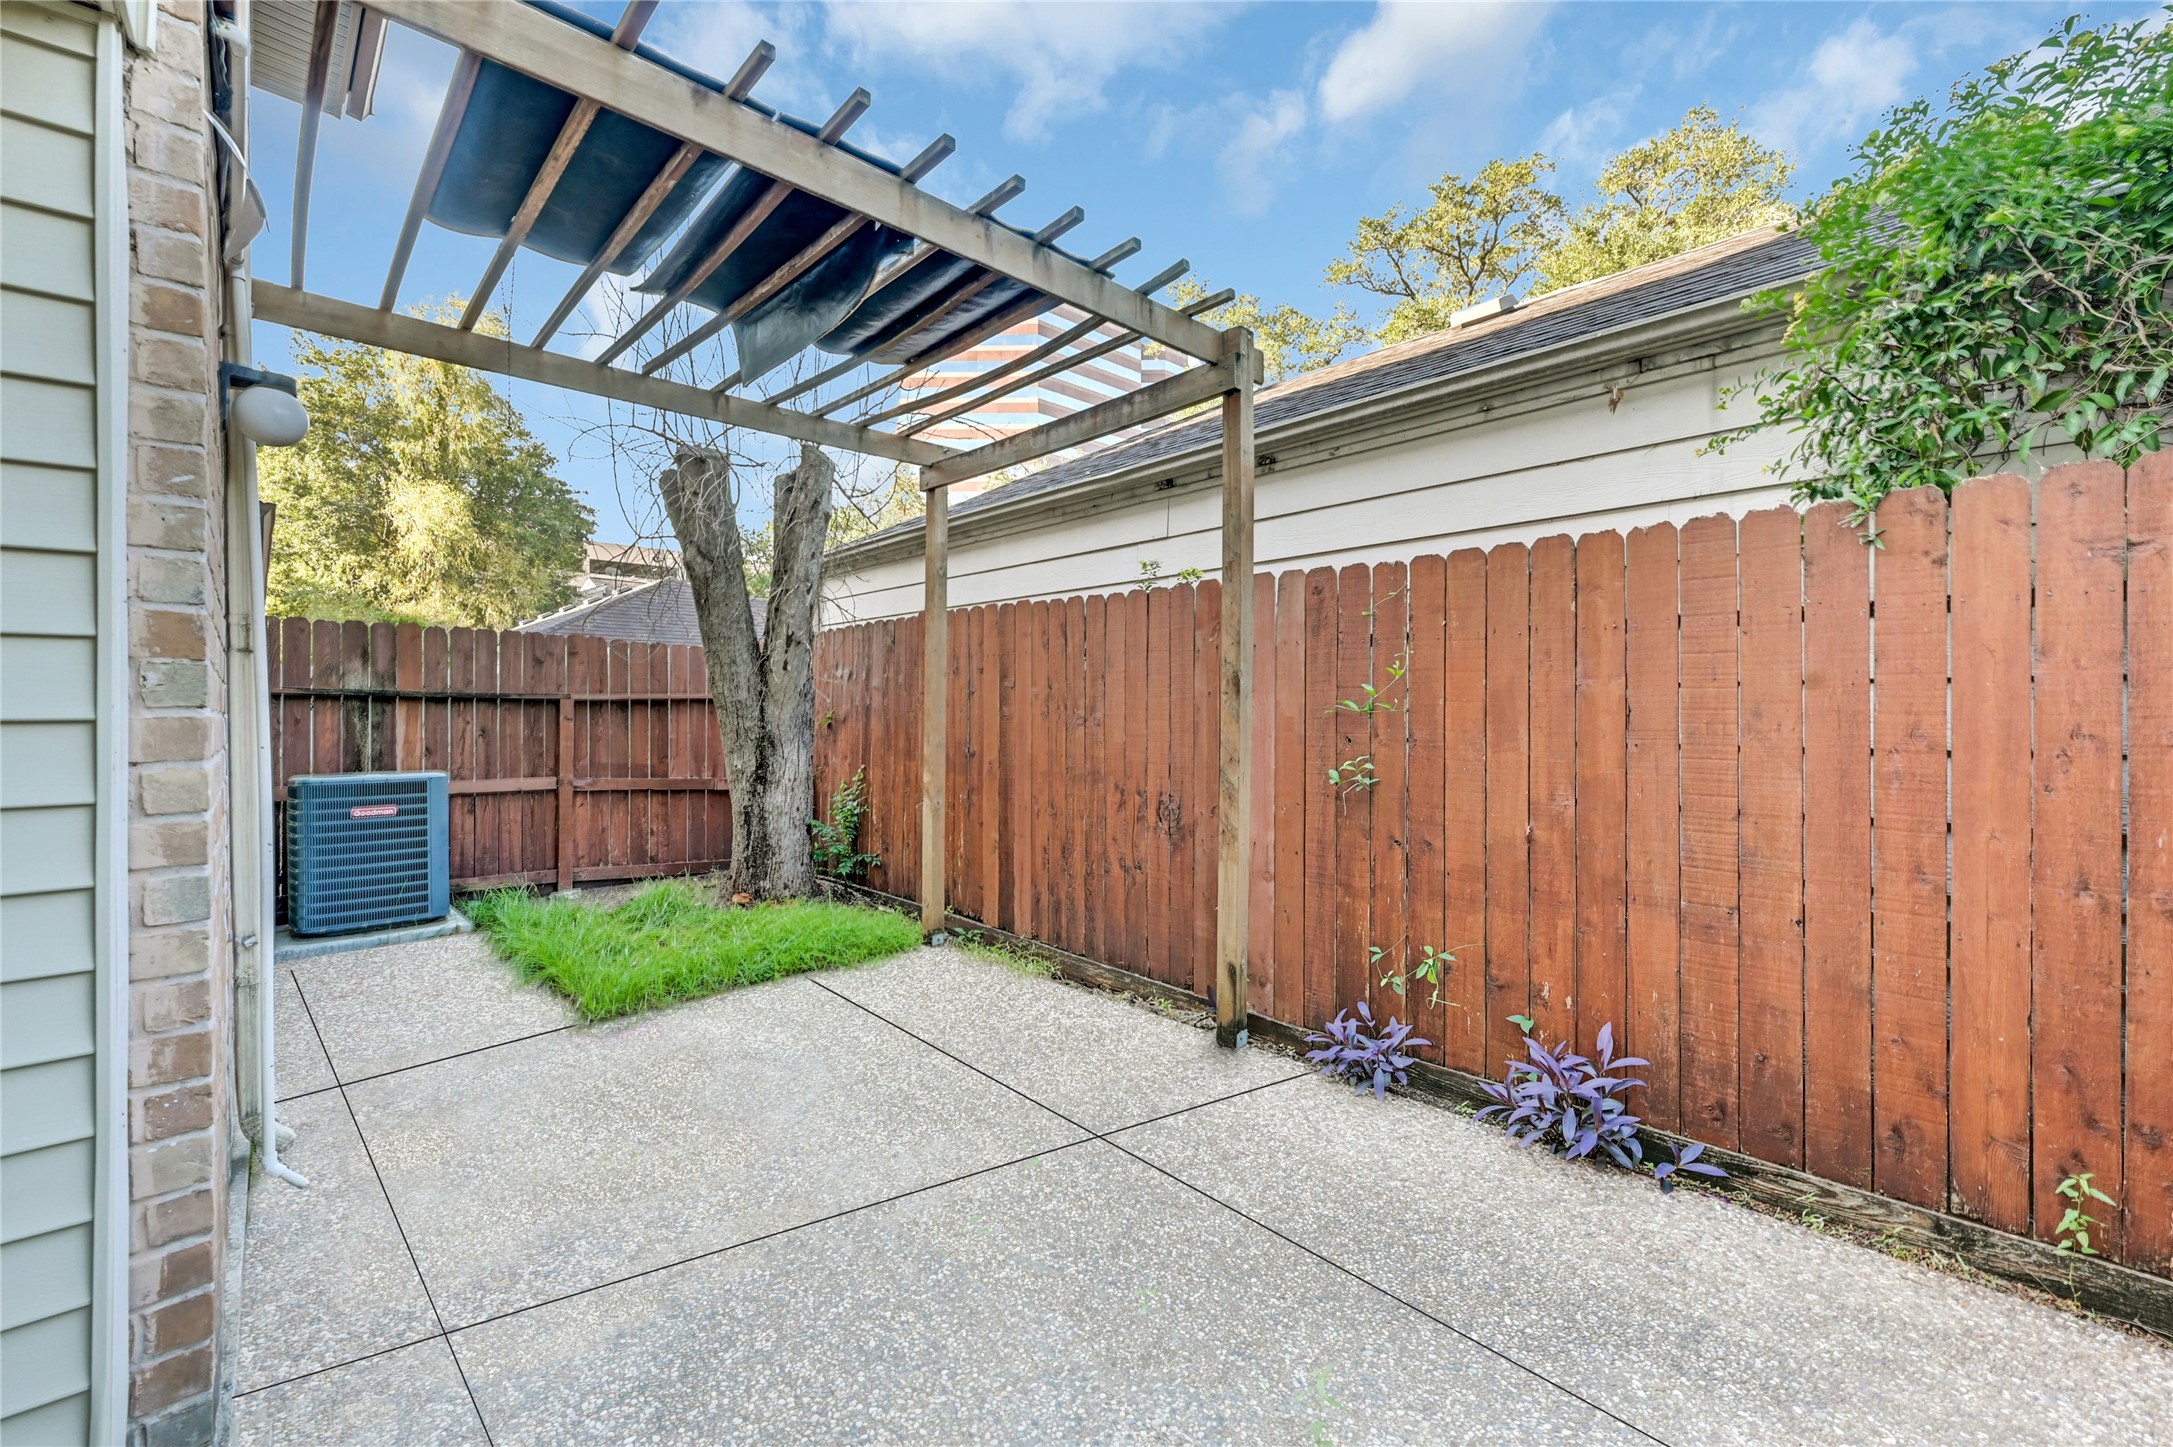 Whether you have plans for a garden or maximizing your entertaining potential, this huge space is yours to create a stunning and private piece of paradise in the city!